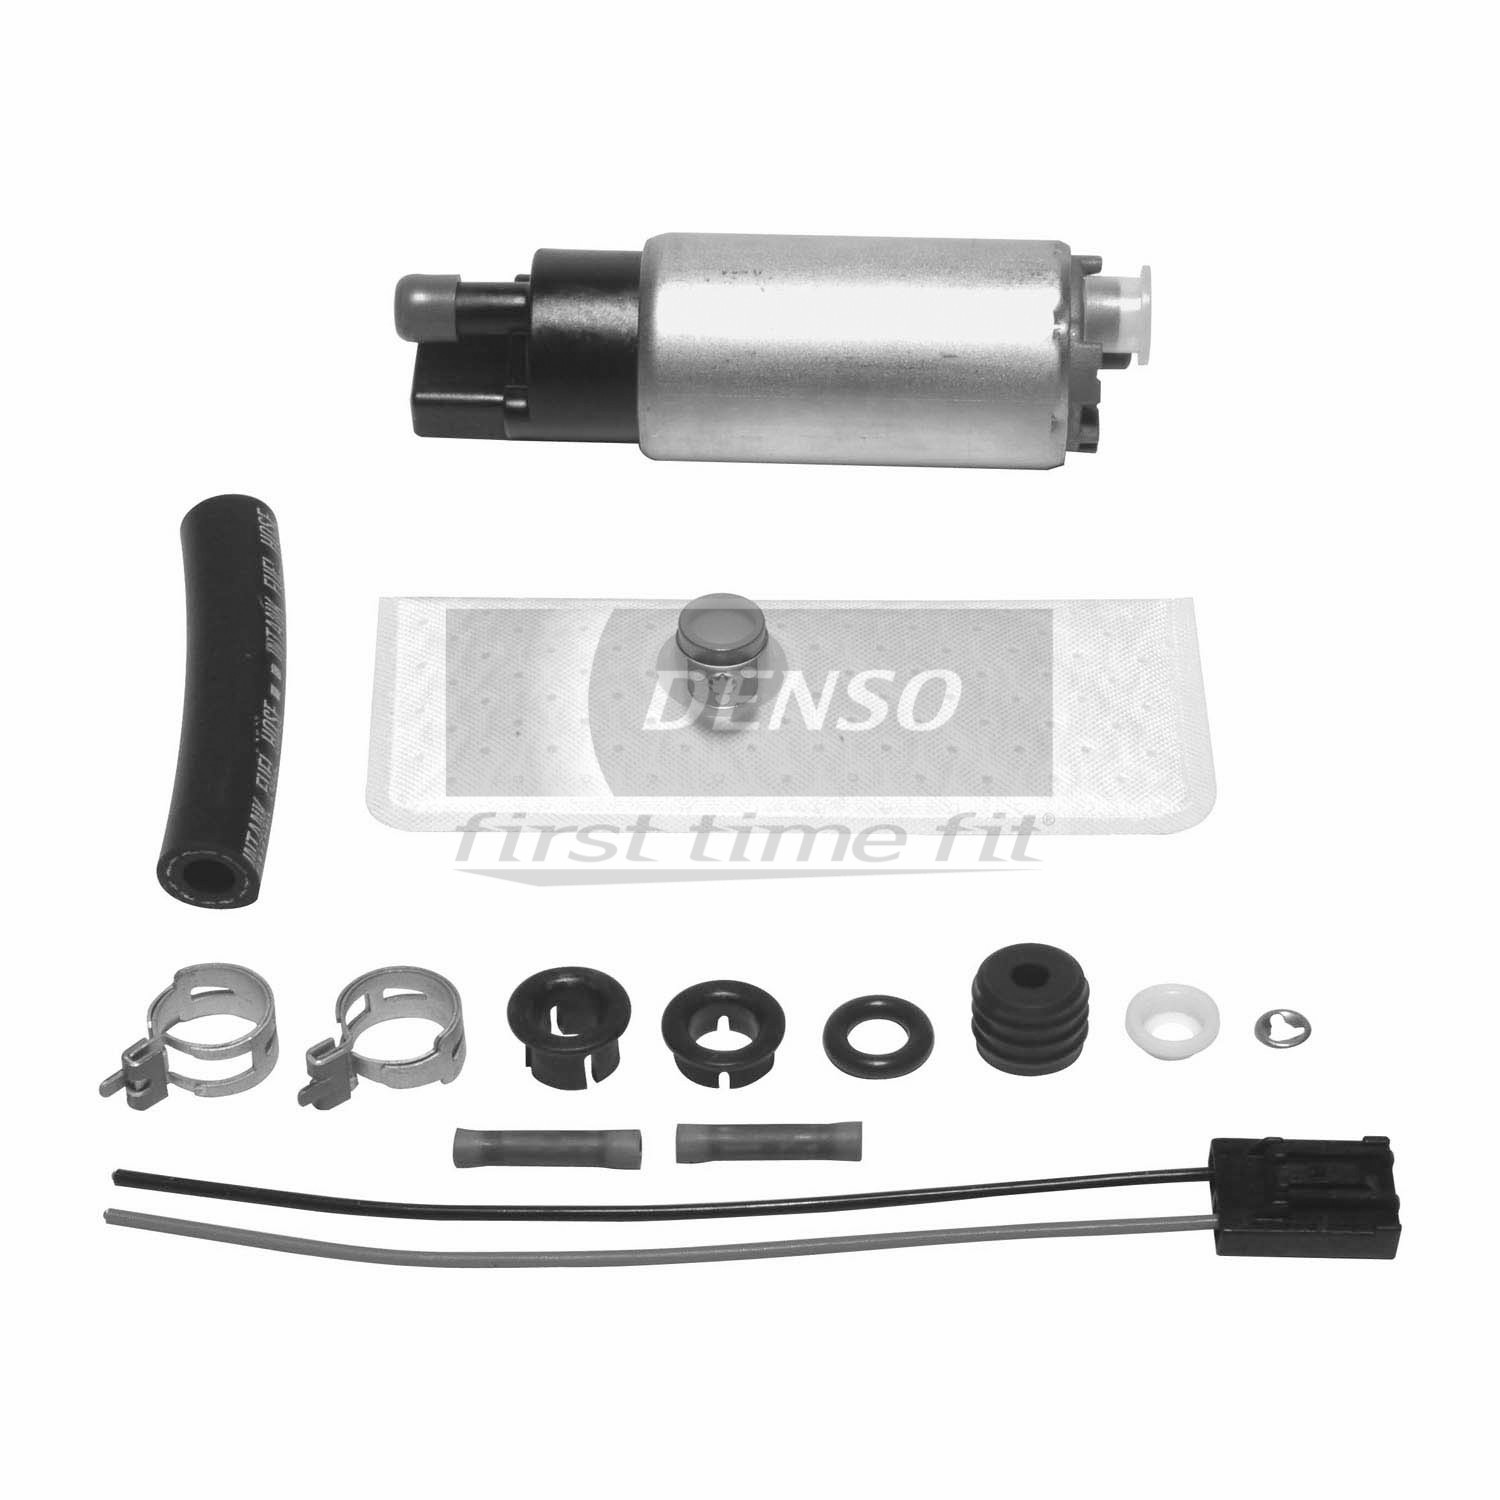 Image of ID 9500172 Denso 9500172 Fuel Pump and Strainer Set Fits 1997-1999 Ford Econoline Super Duty